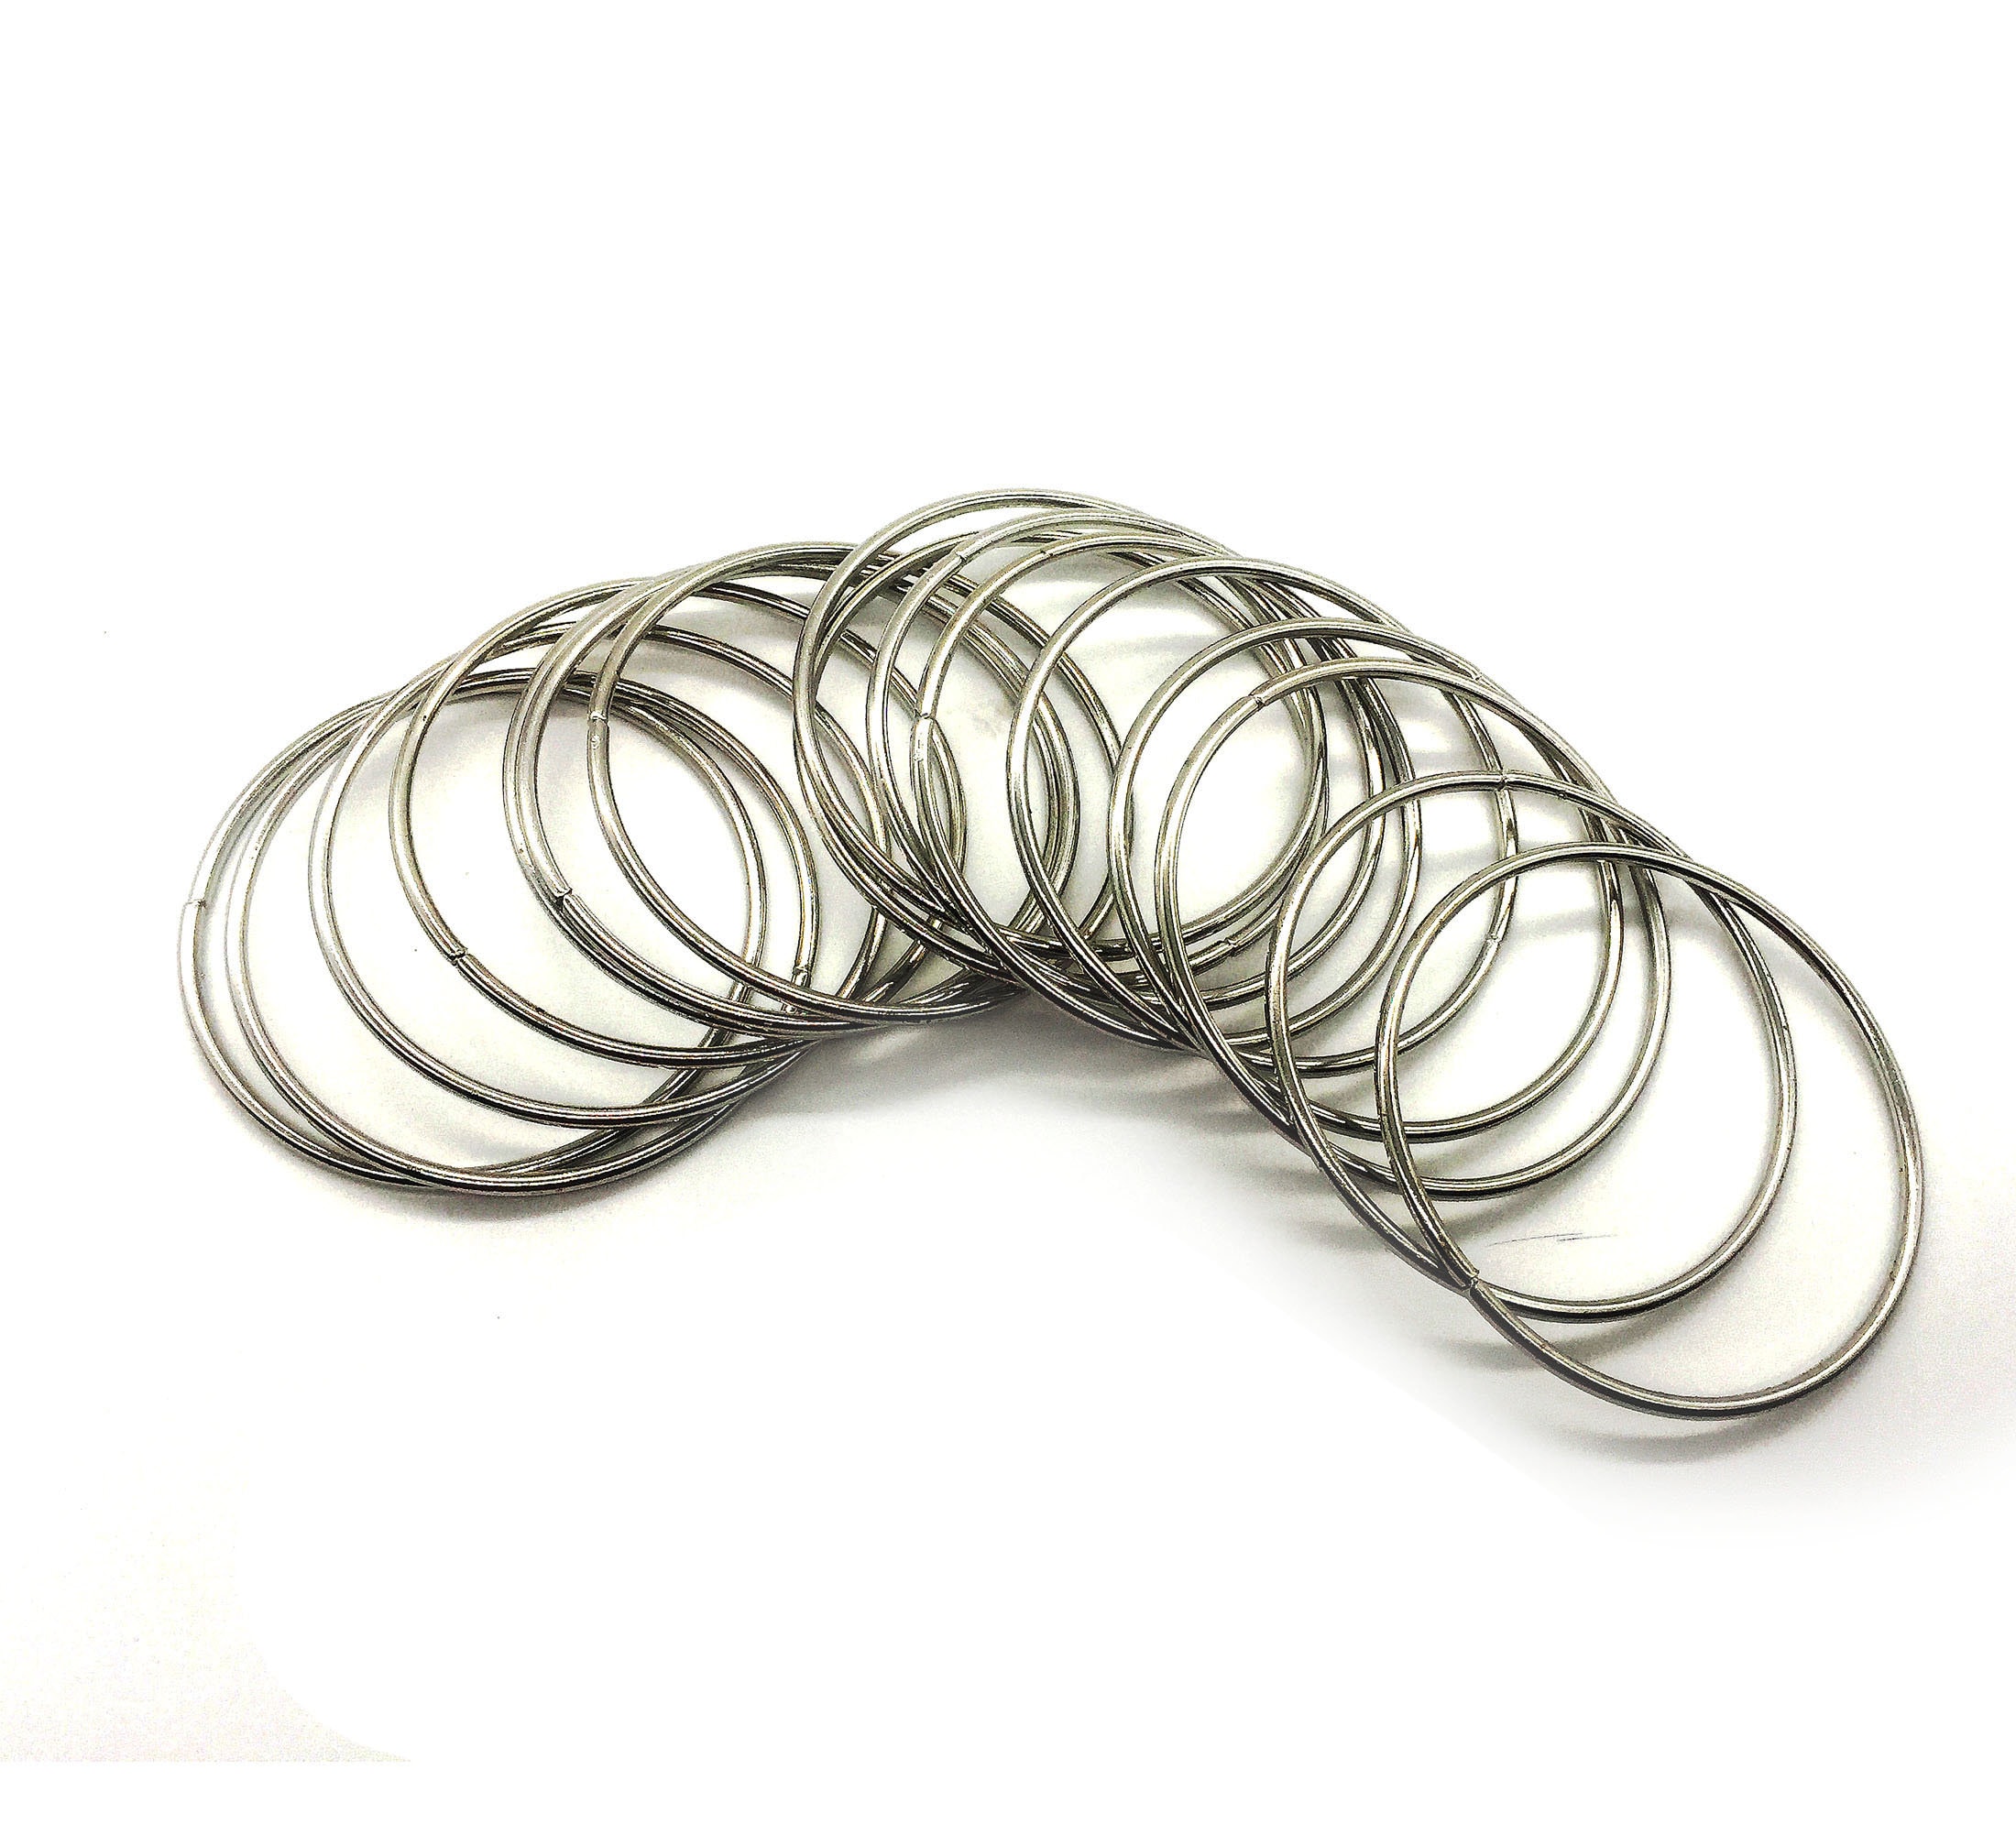 KALIONE 10 Pcs 5 Inch Metal Rings for Craft Silver Hoops Floral Macrame  Hoops Rings for DIY Crafts Macrame Dream Catcher Supplies(Silver,5 inch)